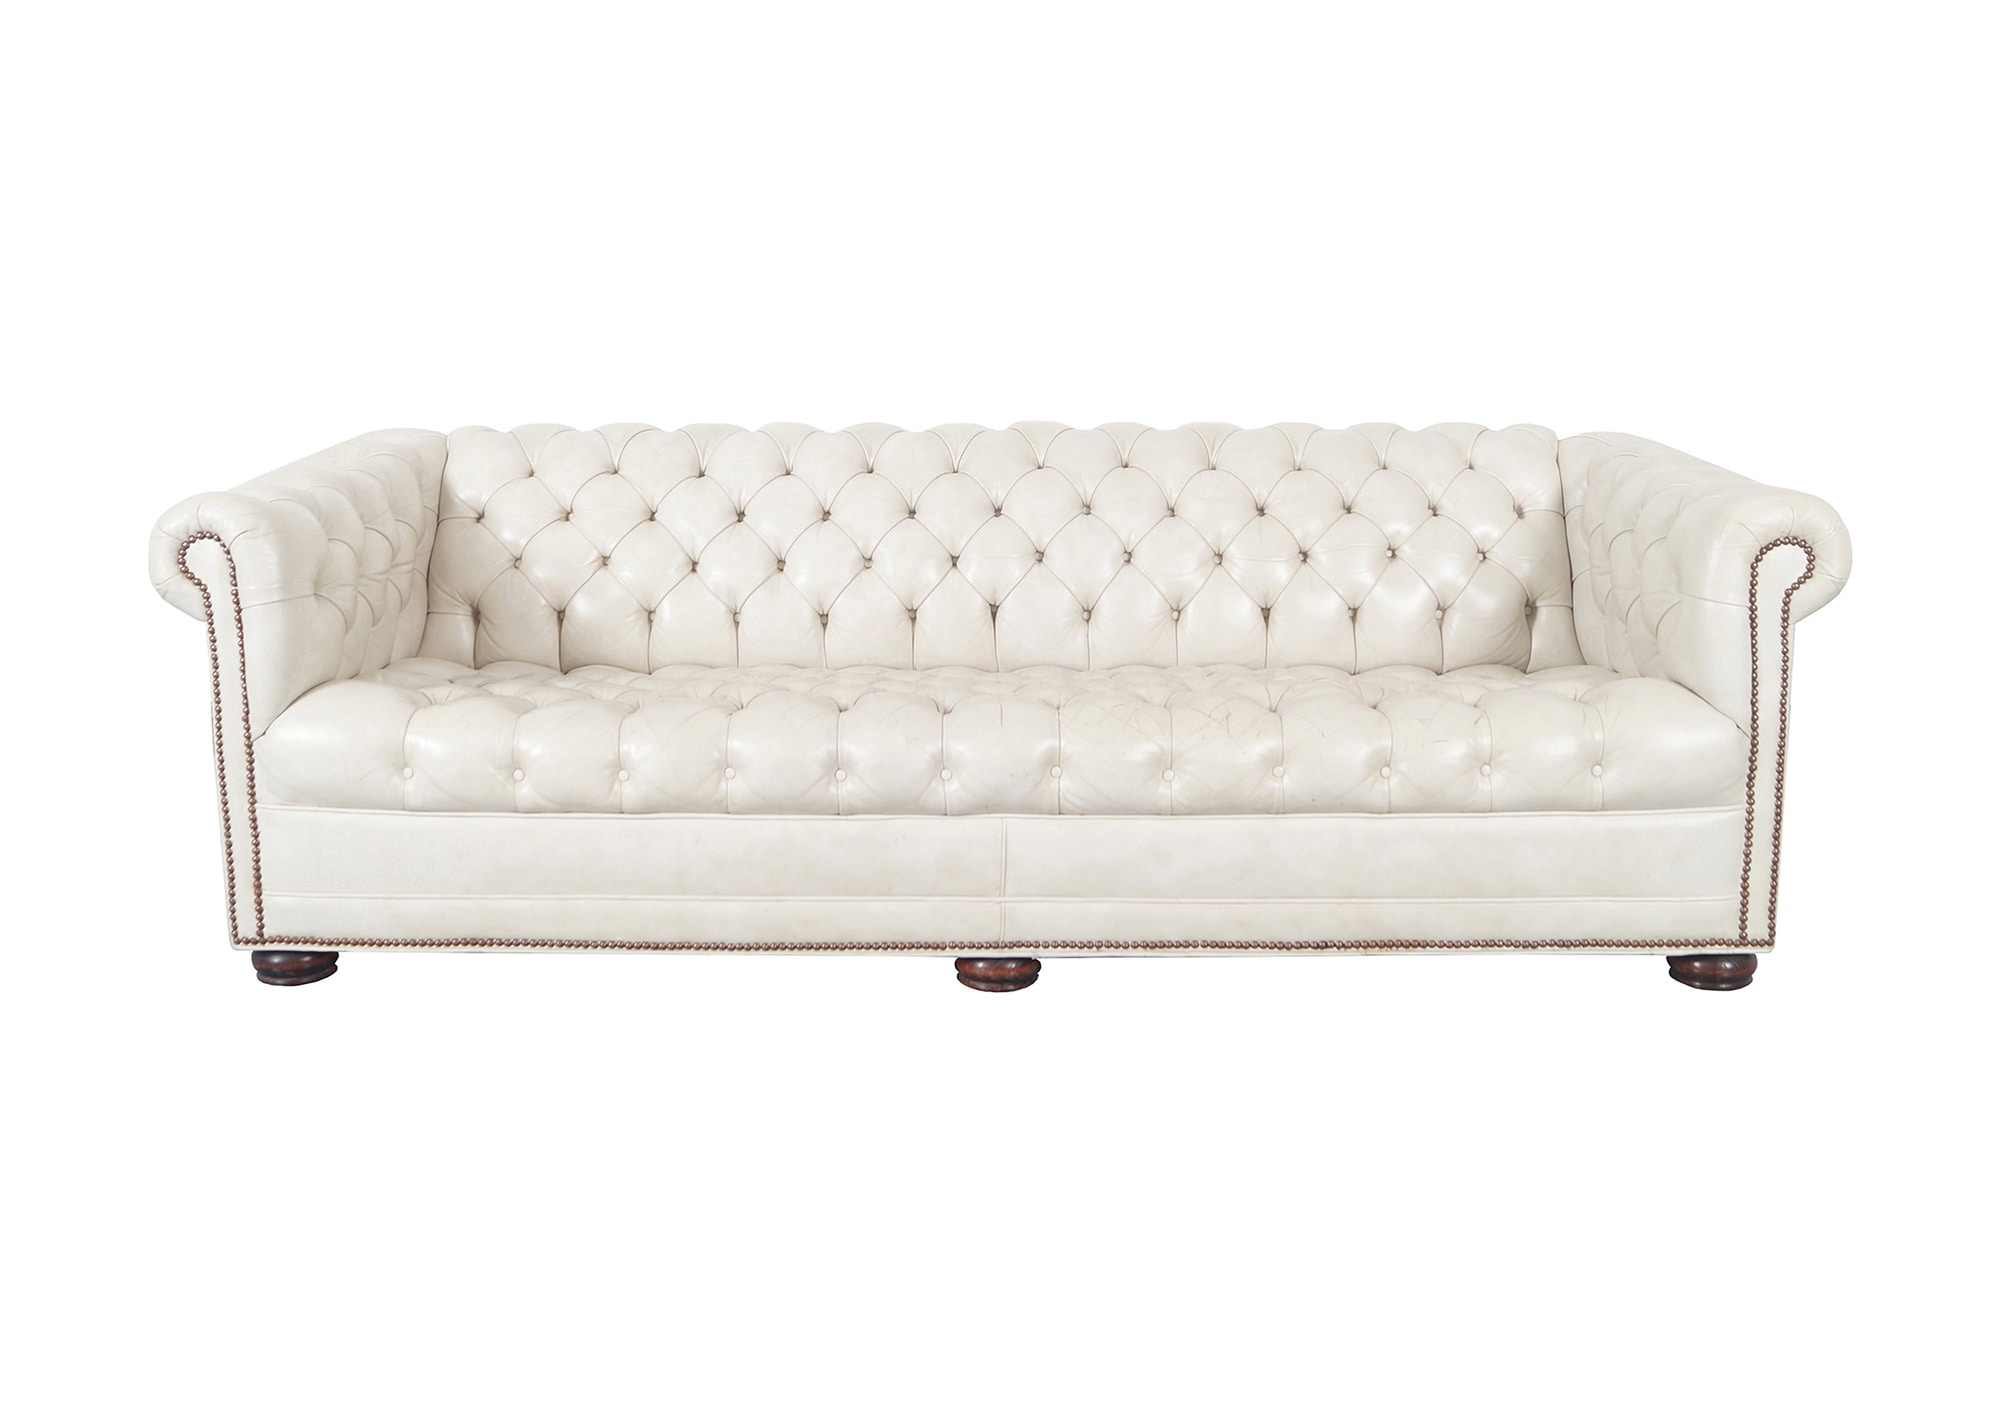 Vintage Leather Chesterfield Sofa 